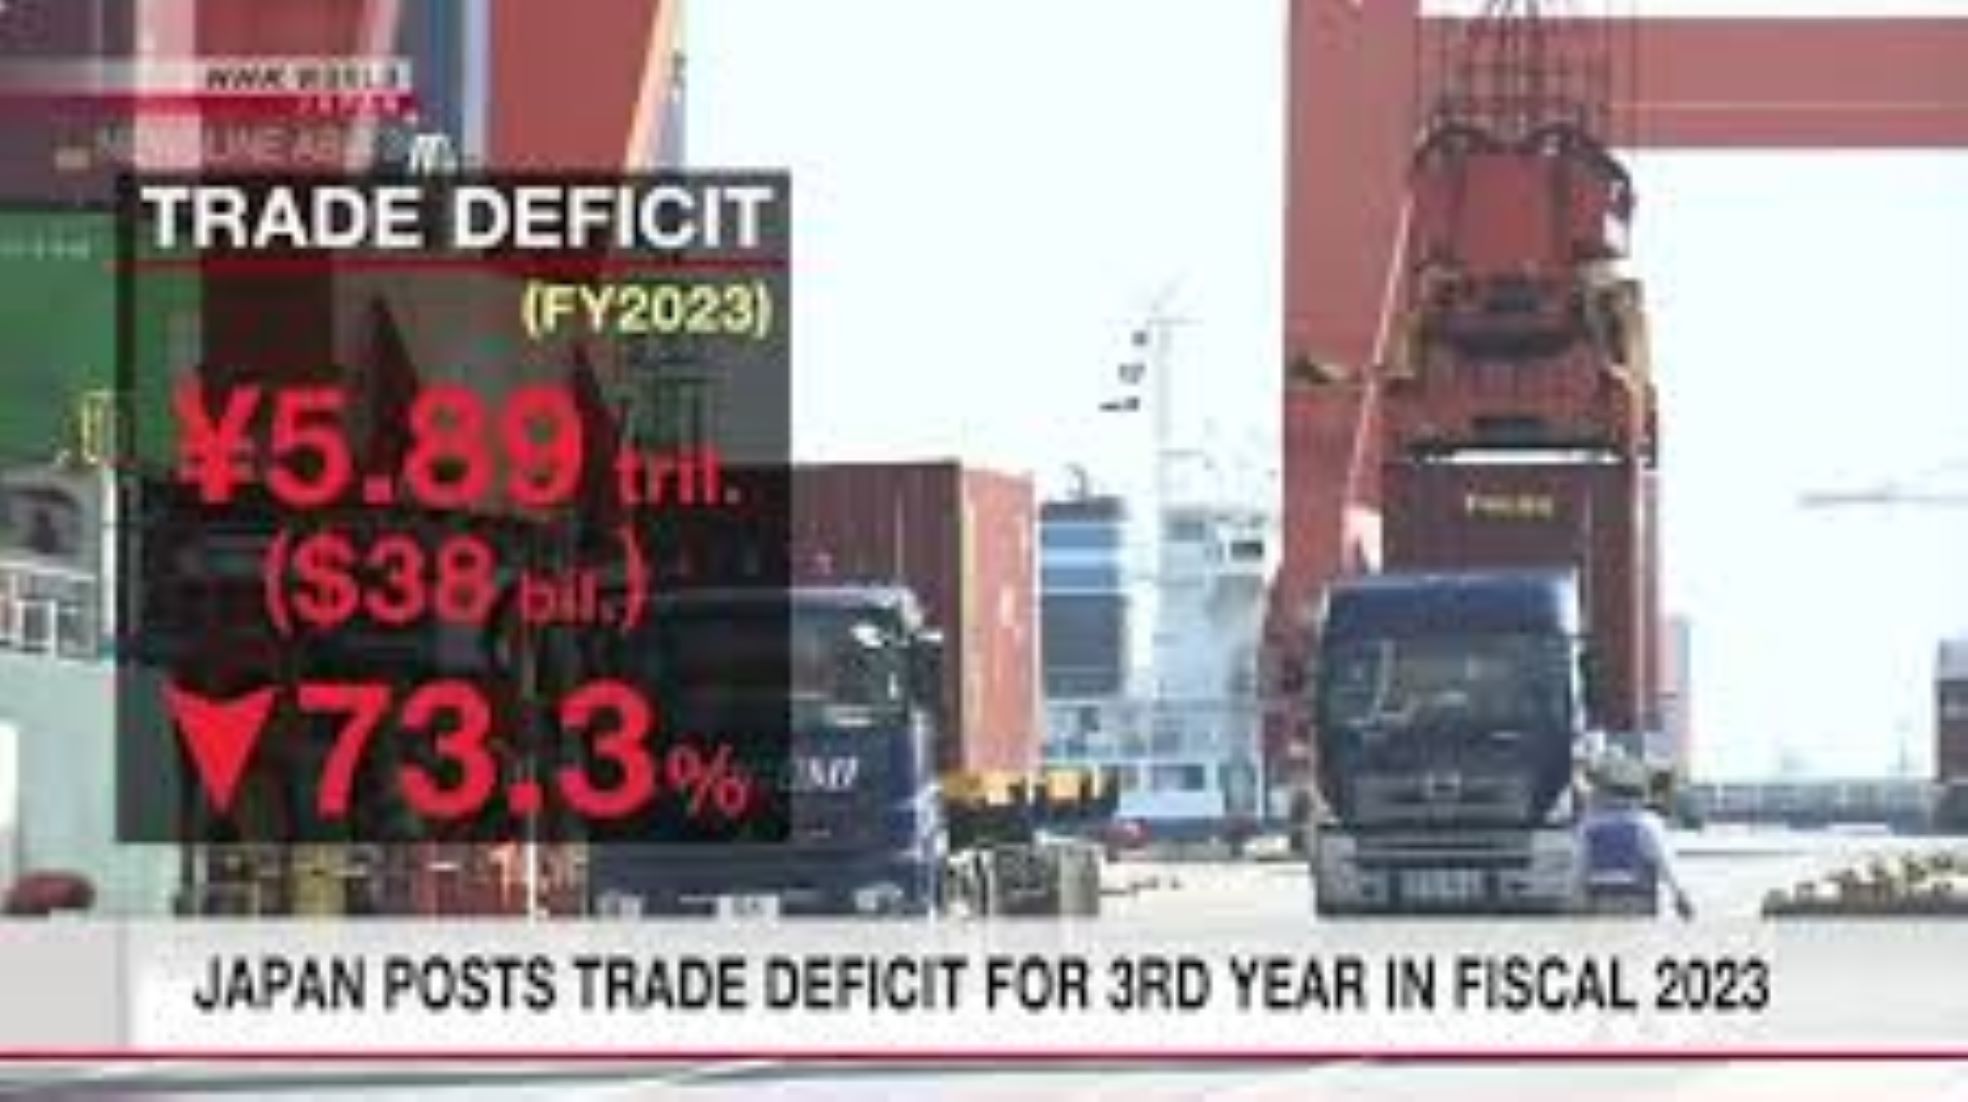 Japan Logged Trade Deficit Of 38 Billion USD In Fiscal 2023